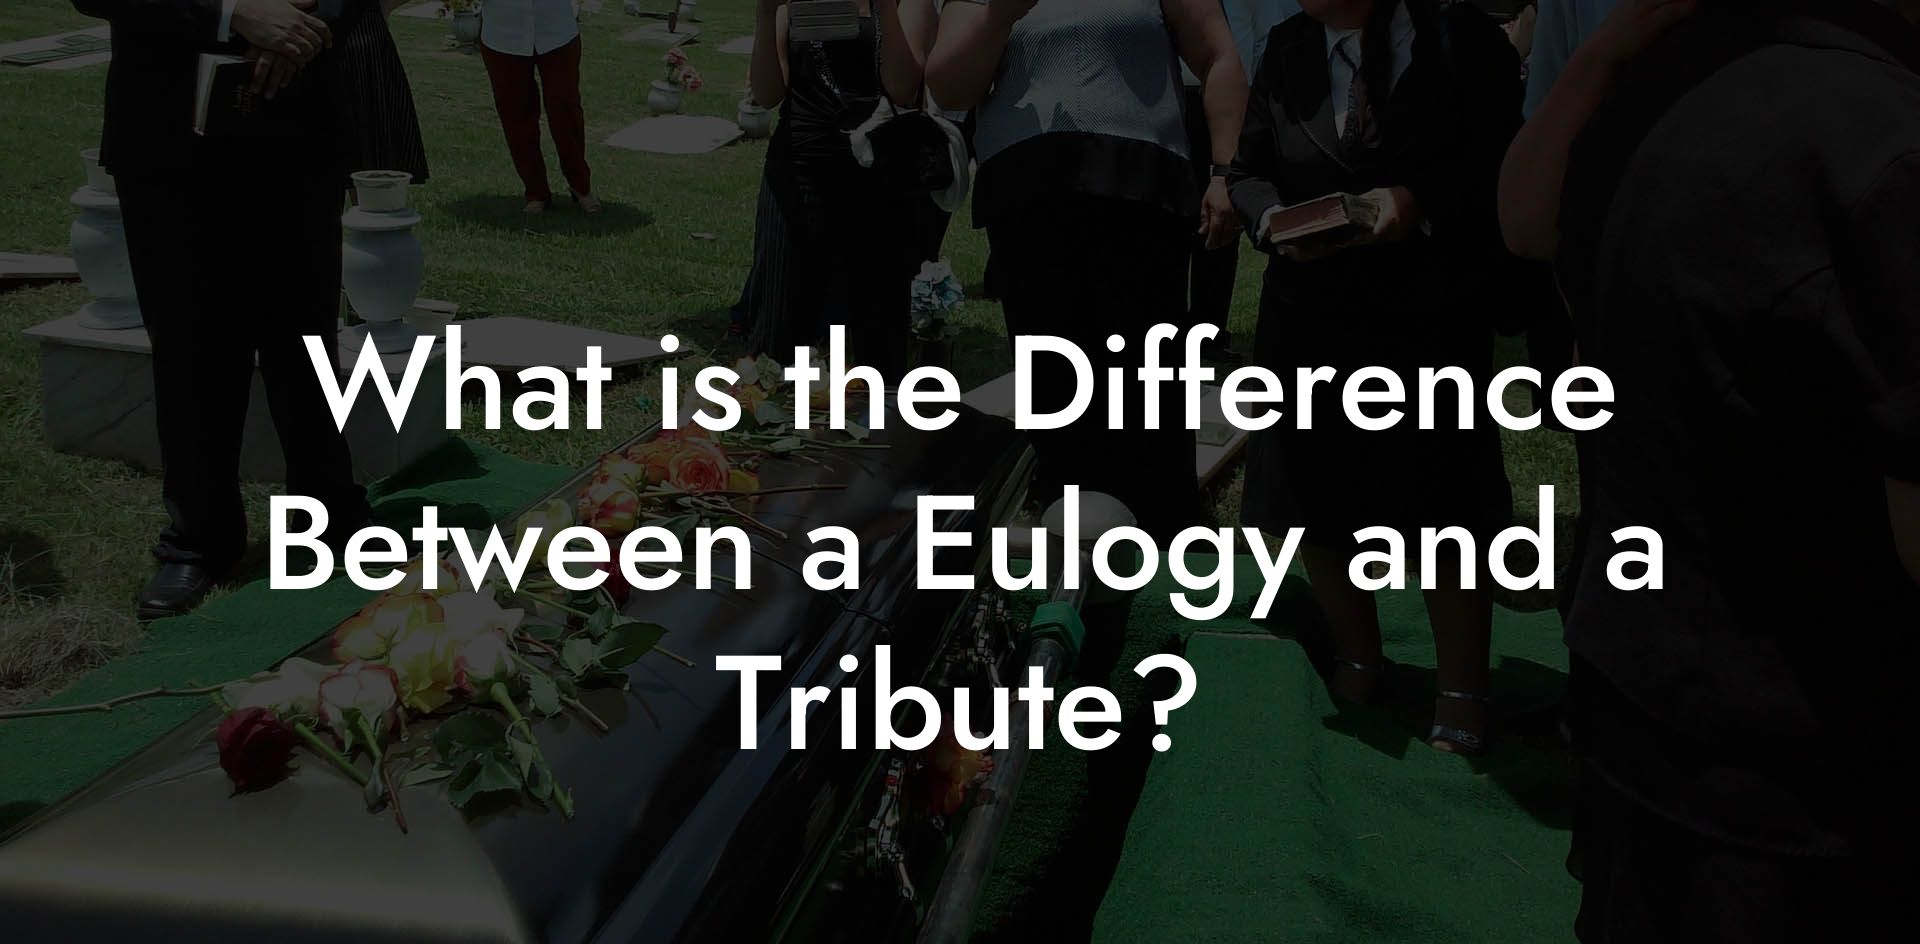 What is the Difference Between a Eulogy and a Tribute?